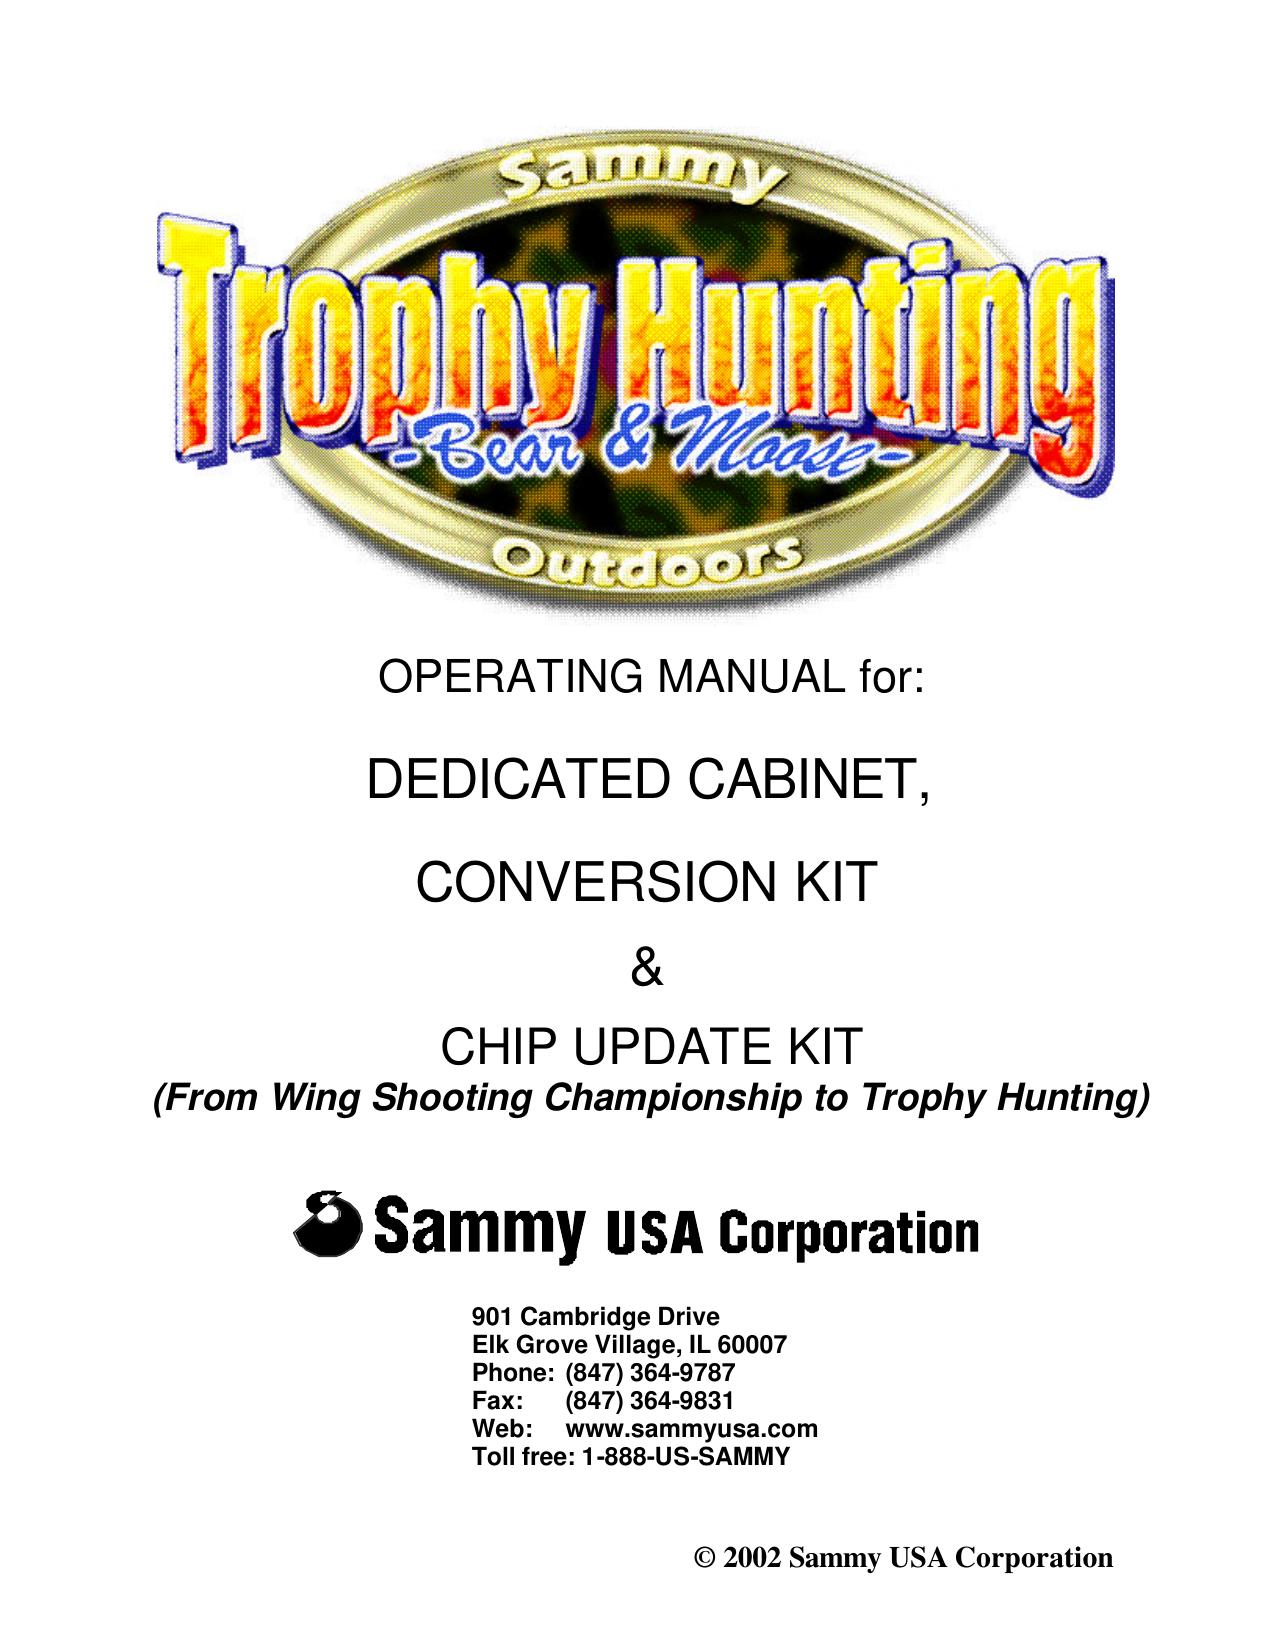 042302 Trophy Hunting Dedicated, KIT and Chip update Manual.pub